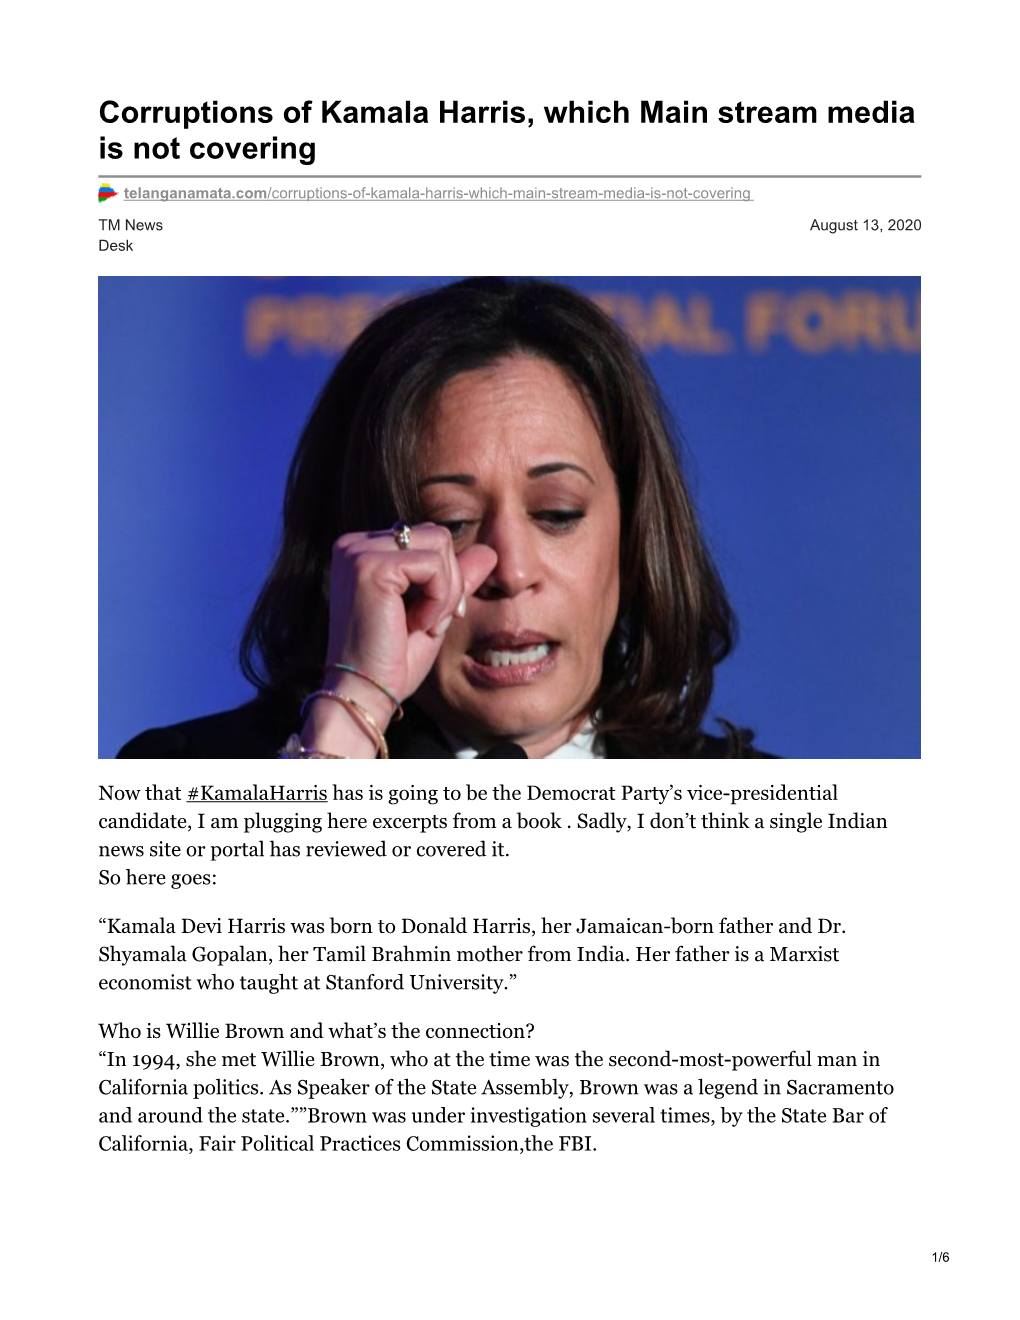 Corruptions of Kamala Harris, Which Main Stream Media Is Not Covering